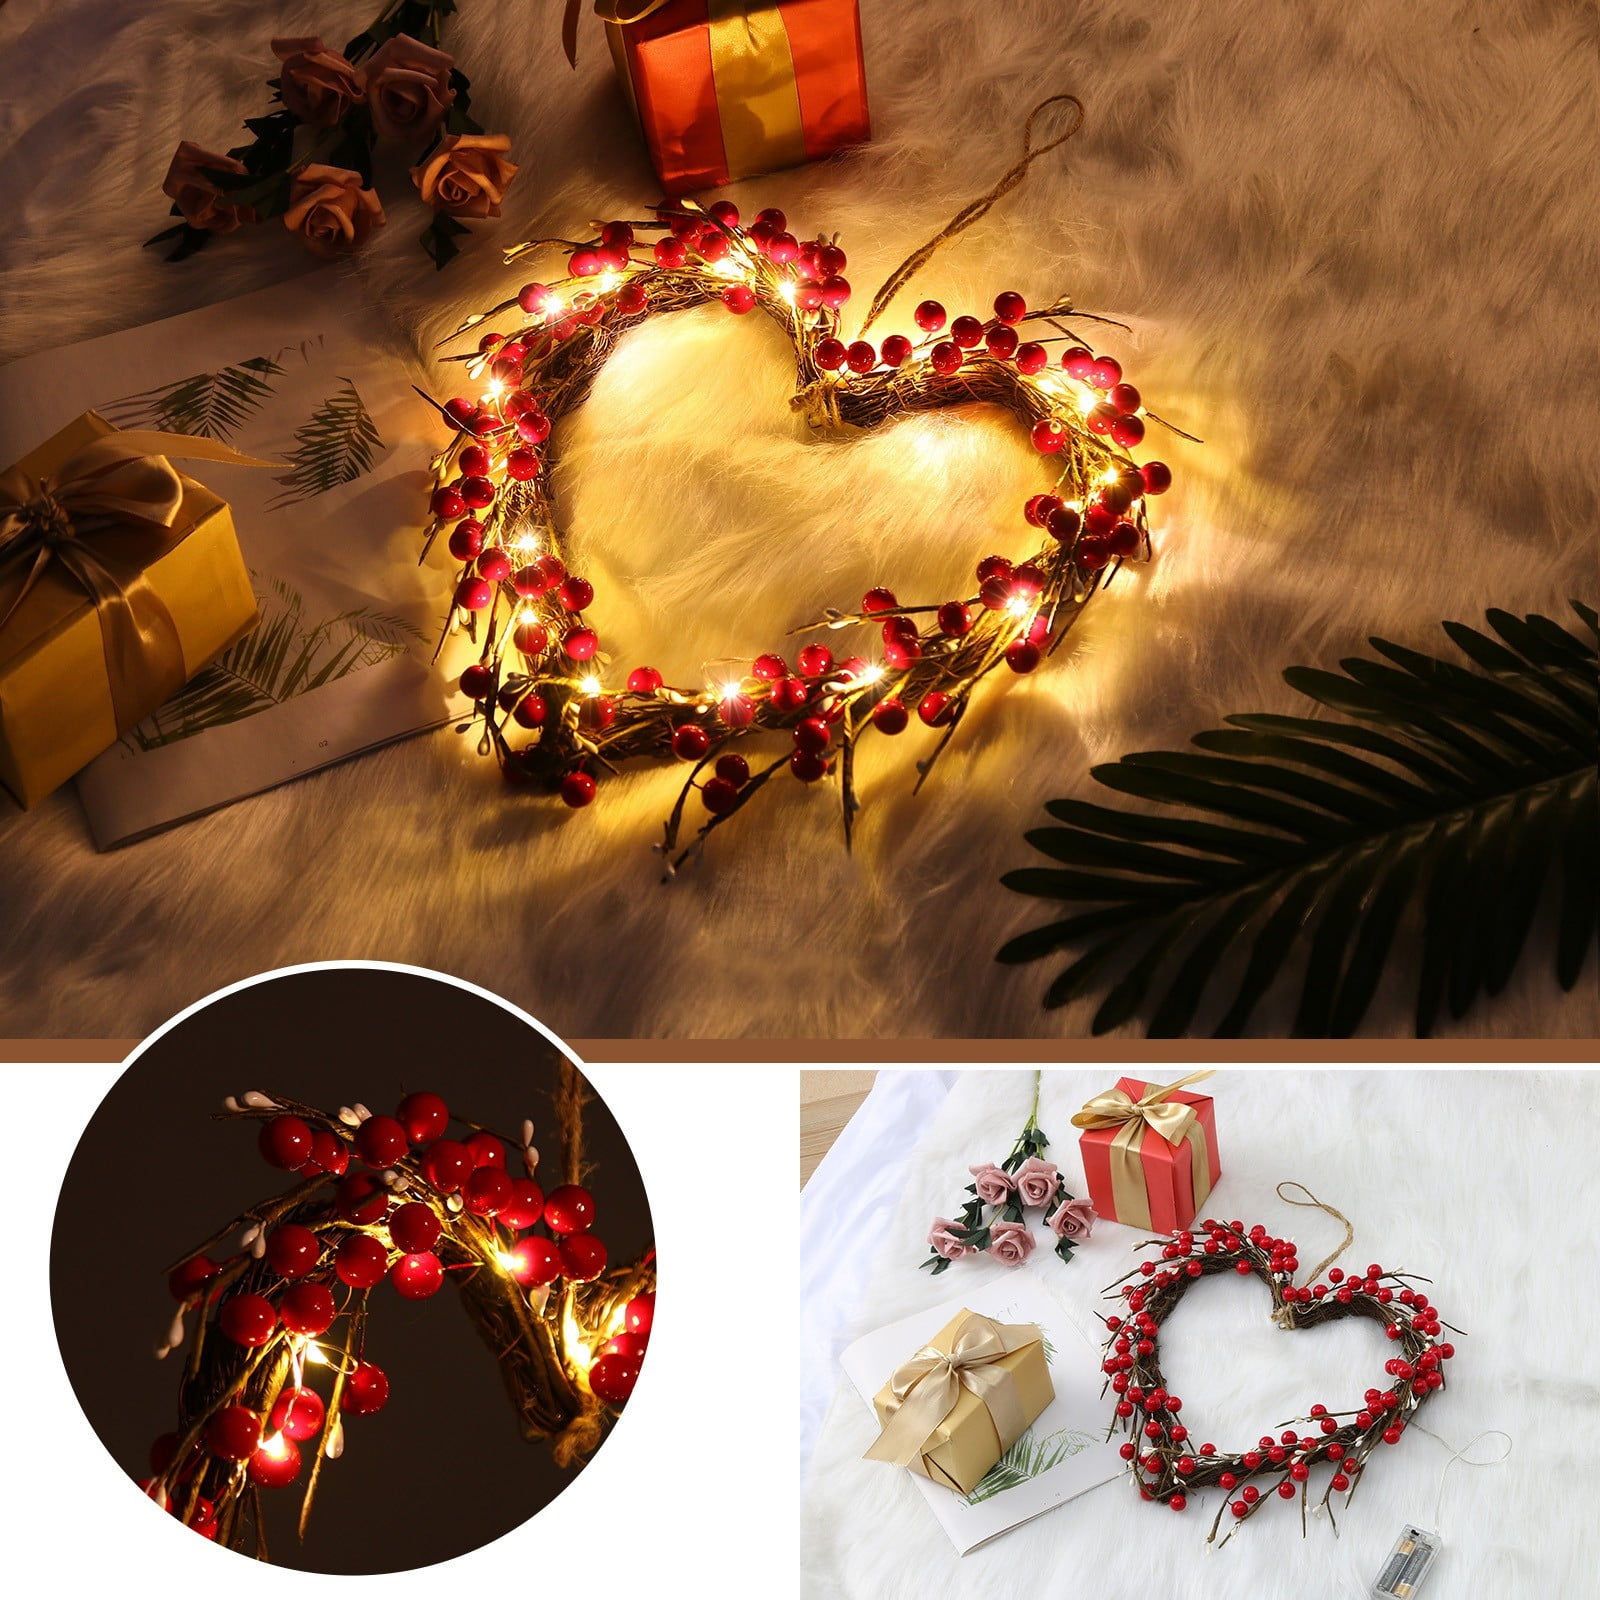 Valentines Day Decor 16 Inch Garland//Wreath with Lights,Heart-Shaped Valentines Day Decor Indoor Home Outdoor Party Gift,Garland with LED Battery Lights